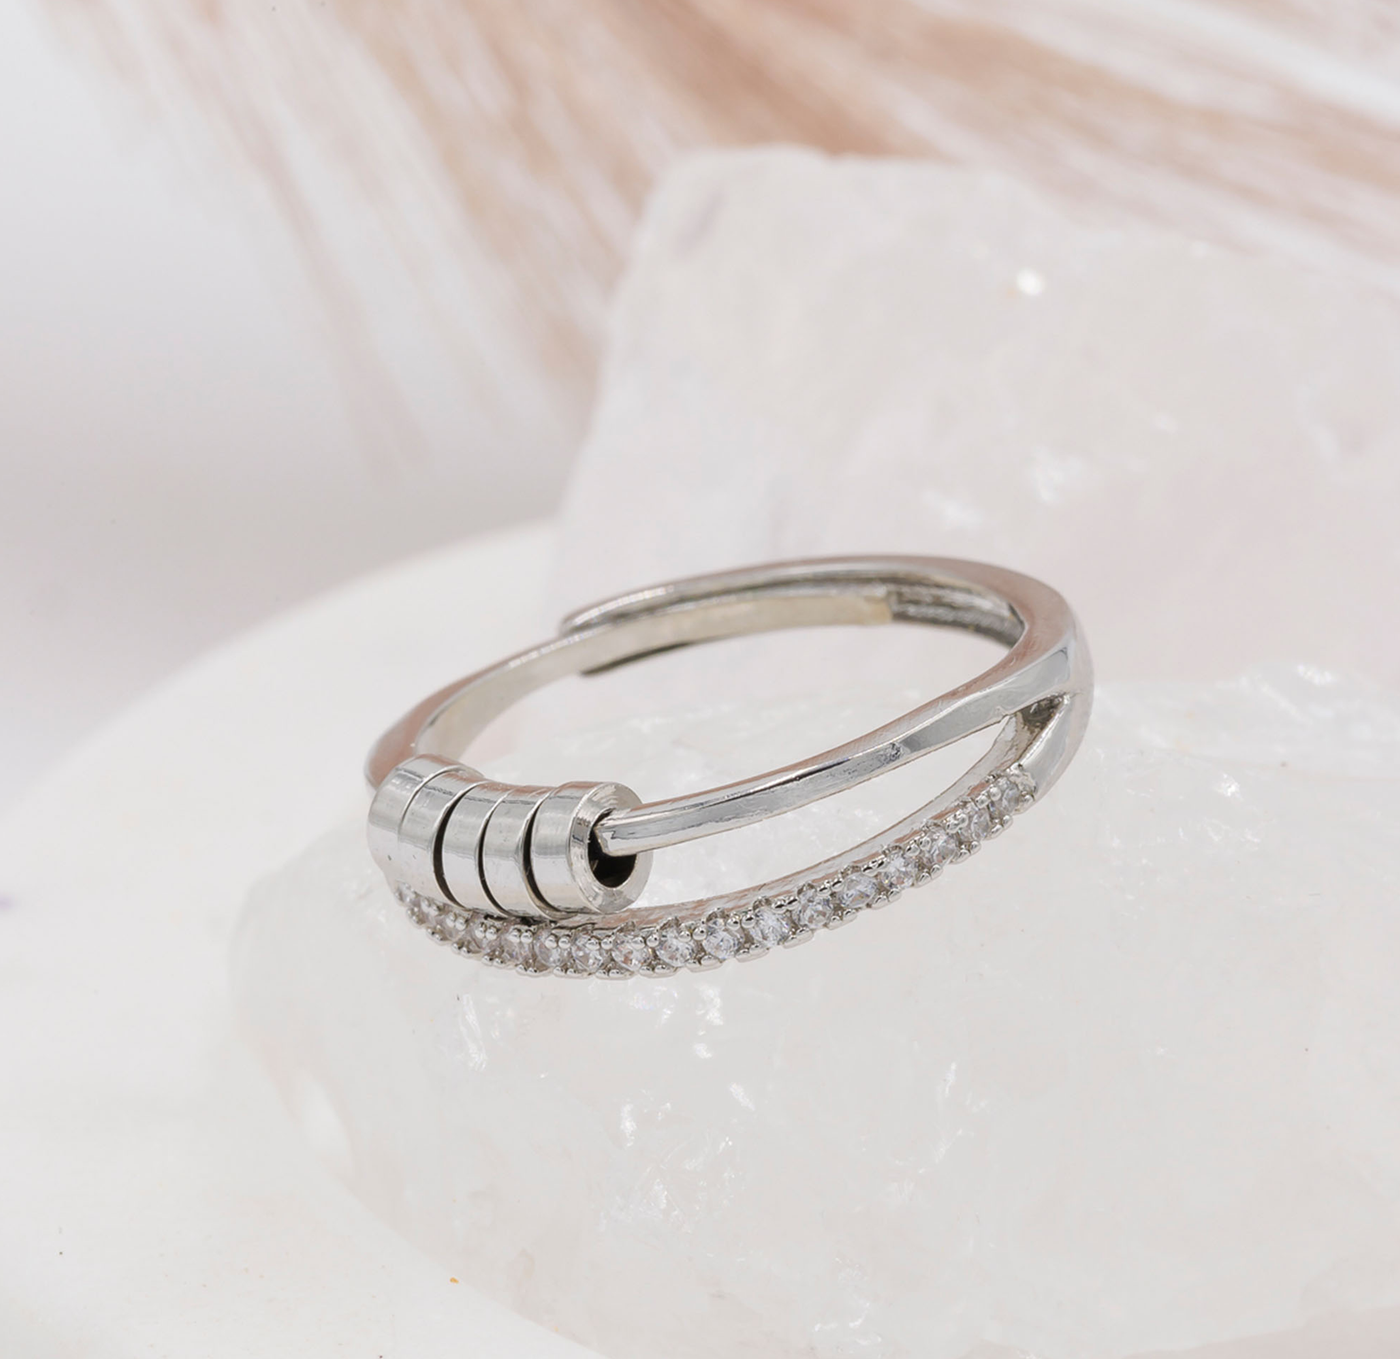 Tranquility Sliding Worry Ring